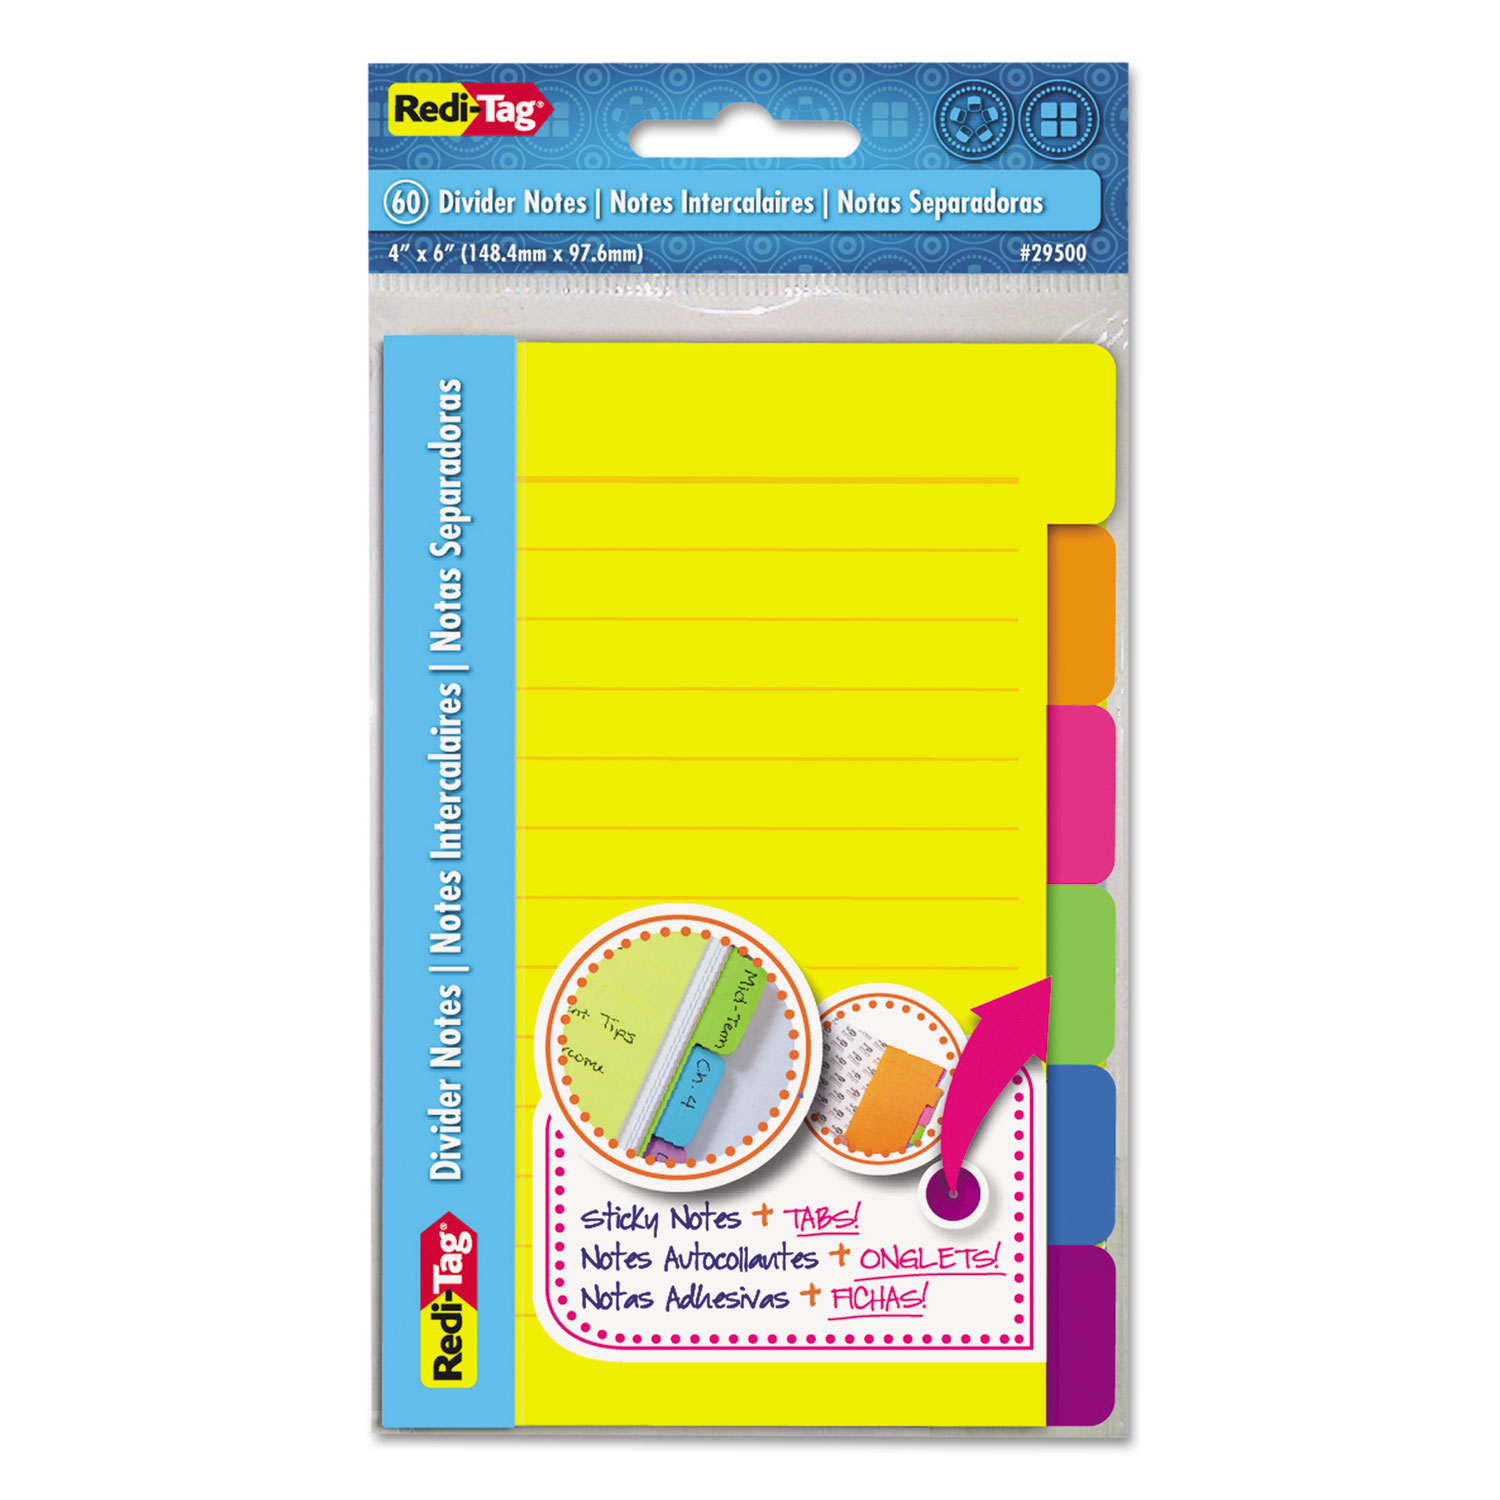 Redi-Tag® Index Sticky Notes, 4 x 6, Ruled, Assorted Colors, 60-Sheet Pad